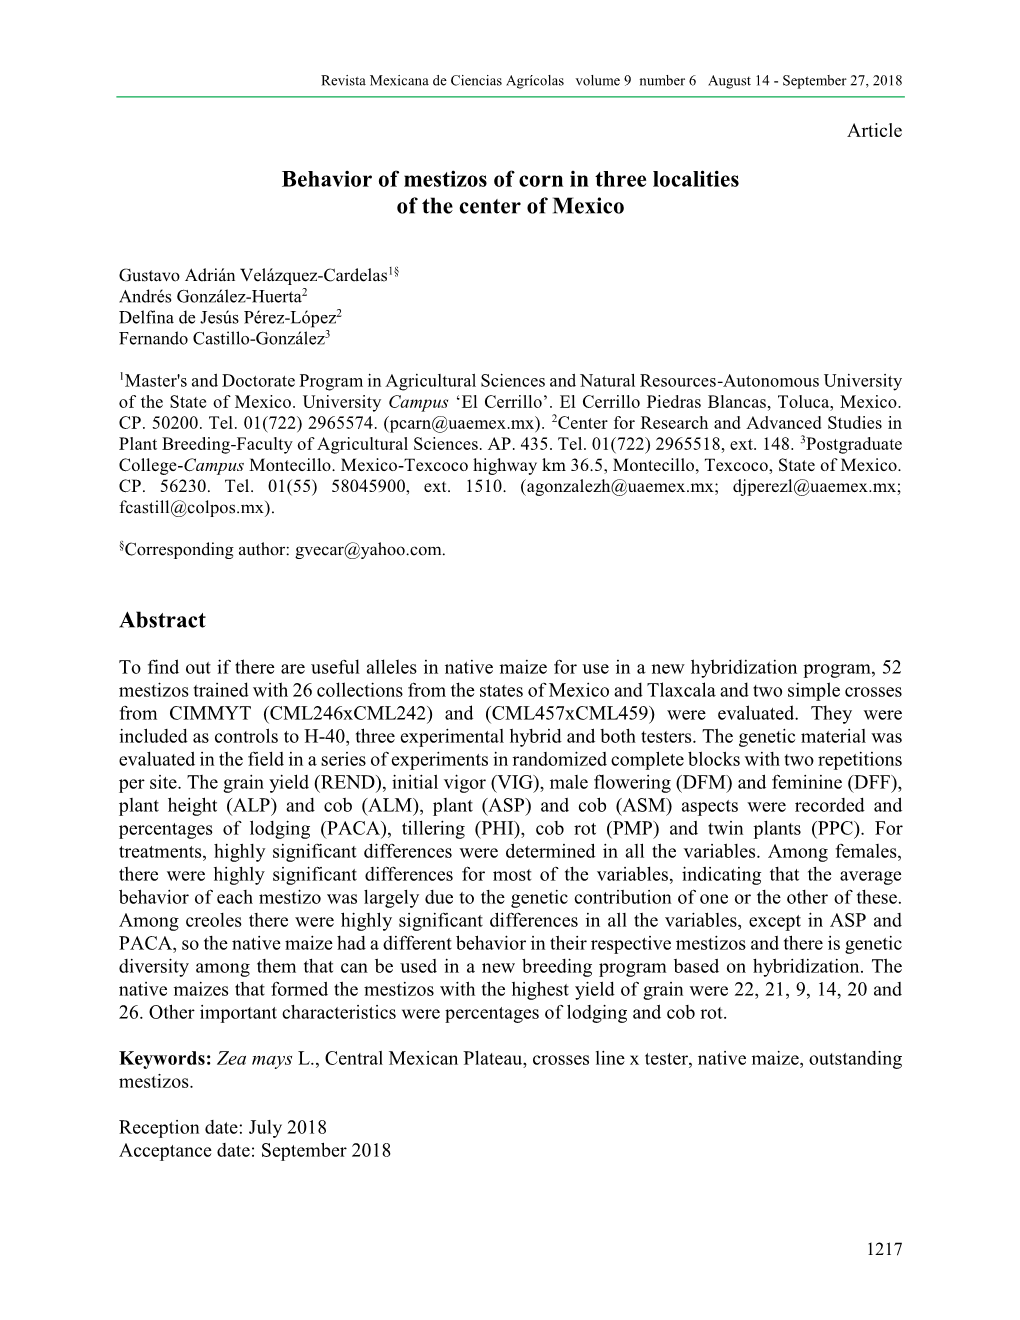 Behavior of Mestizos of Corn in Three Localities of the Center of Mexico Abstract